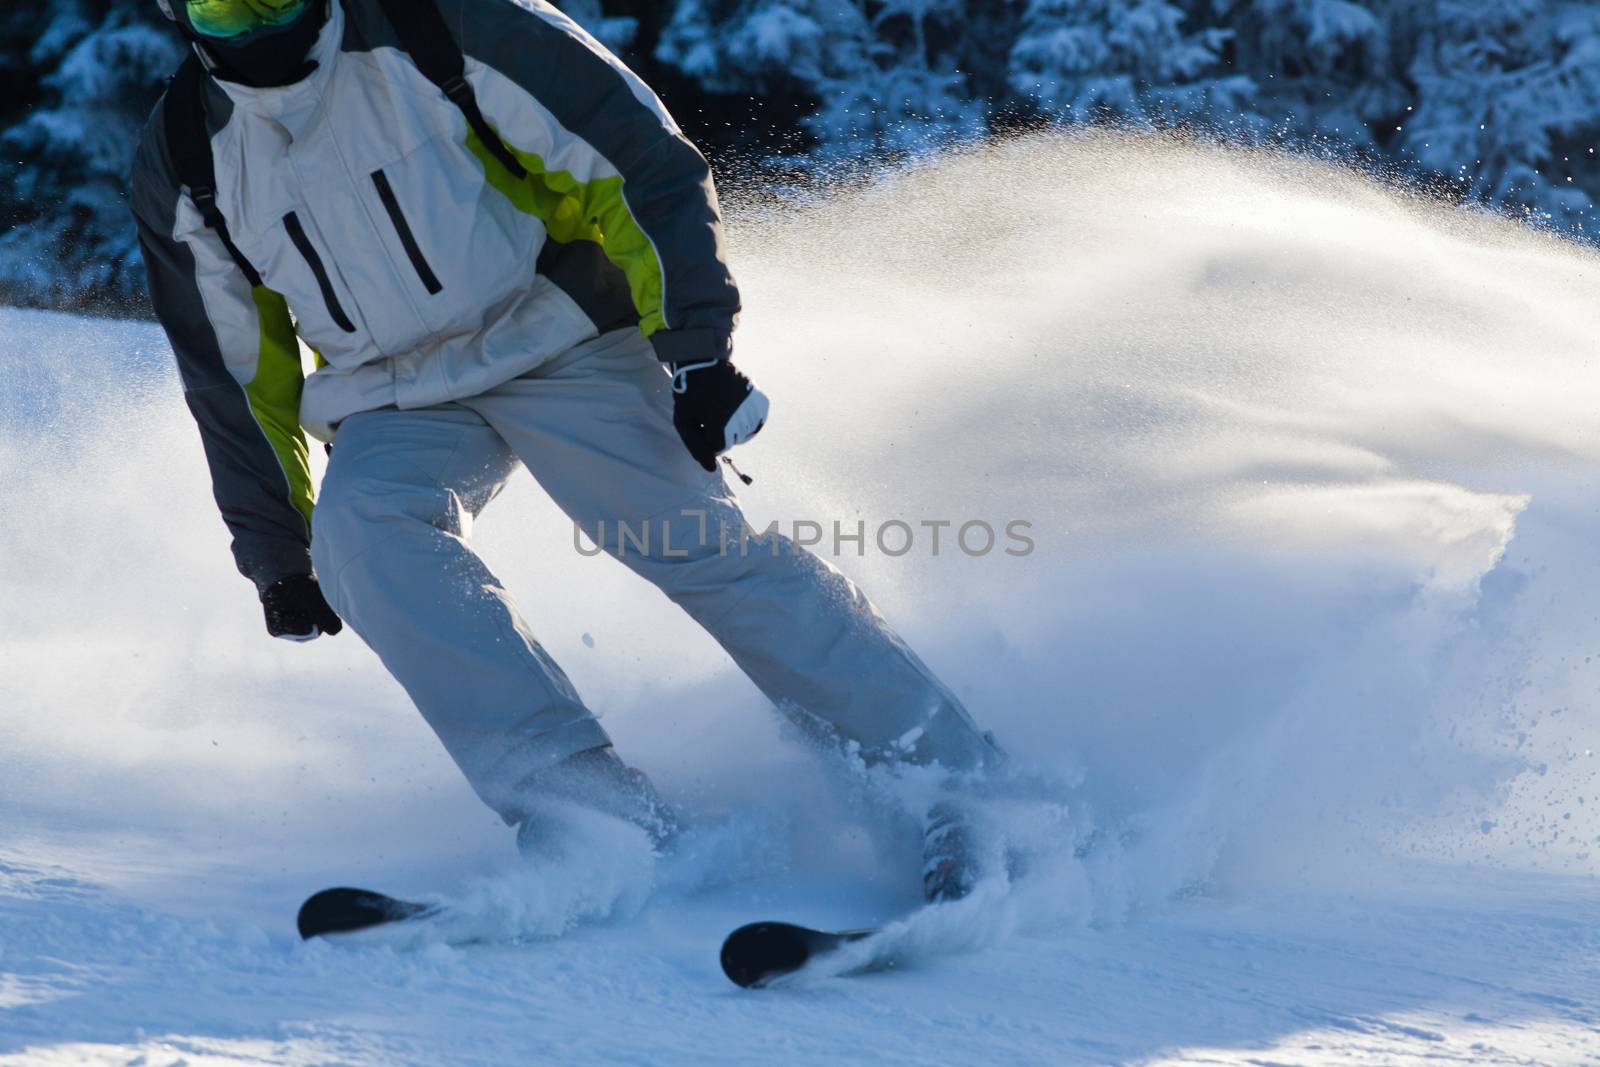 PALTINIS, ROMANIA - JANUARY 24, 2018: Unidentified skier on ski slope on January 24, 2018 in Paltinis, one of the oldest ski resorts in Romania.